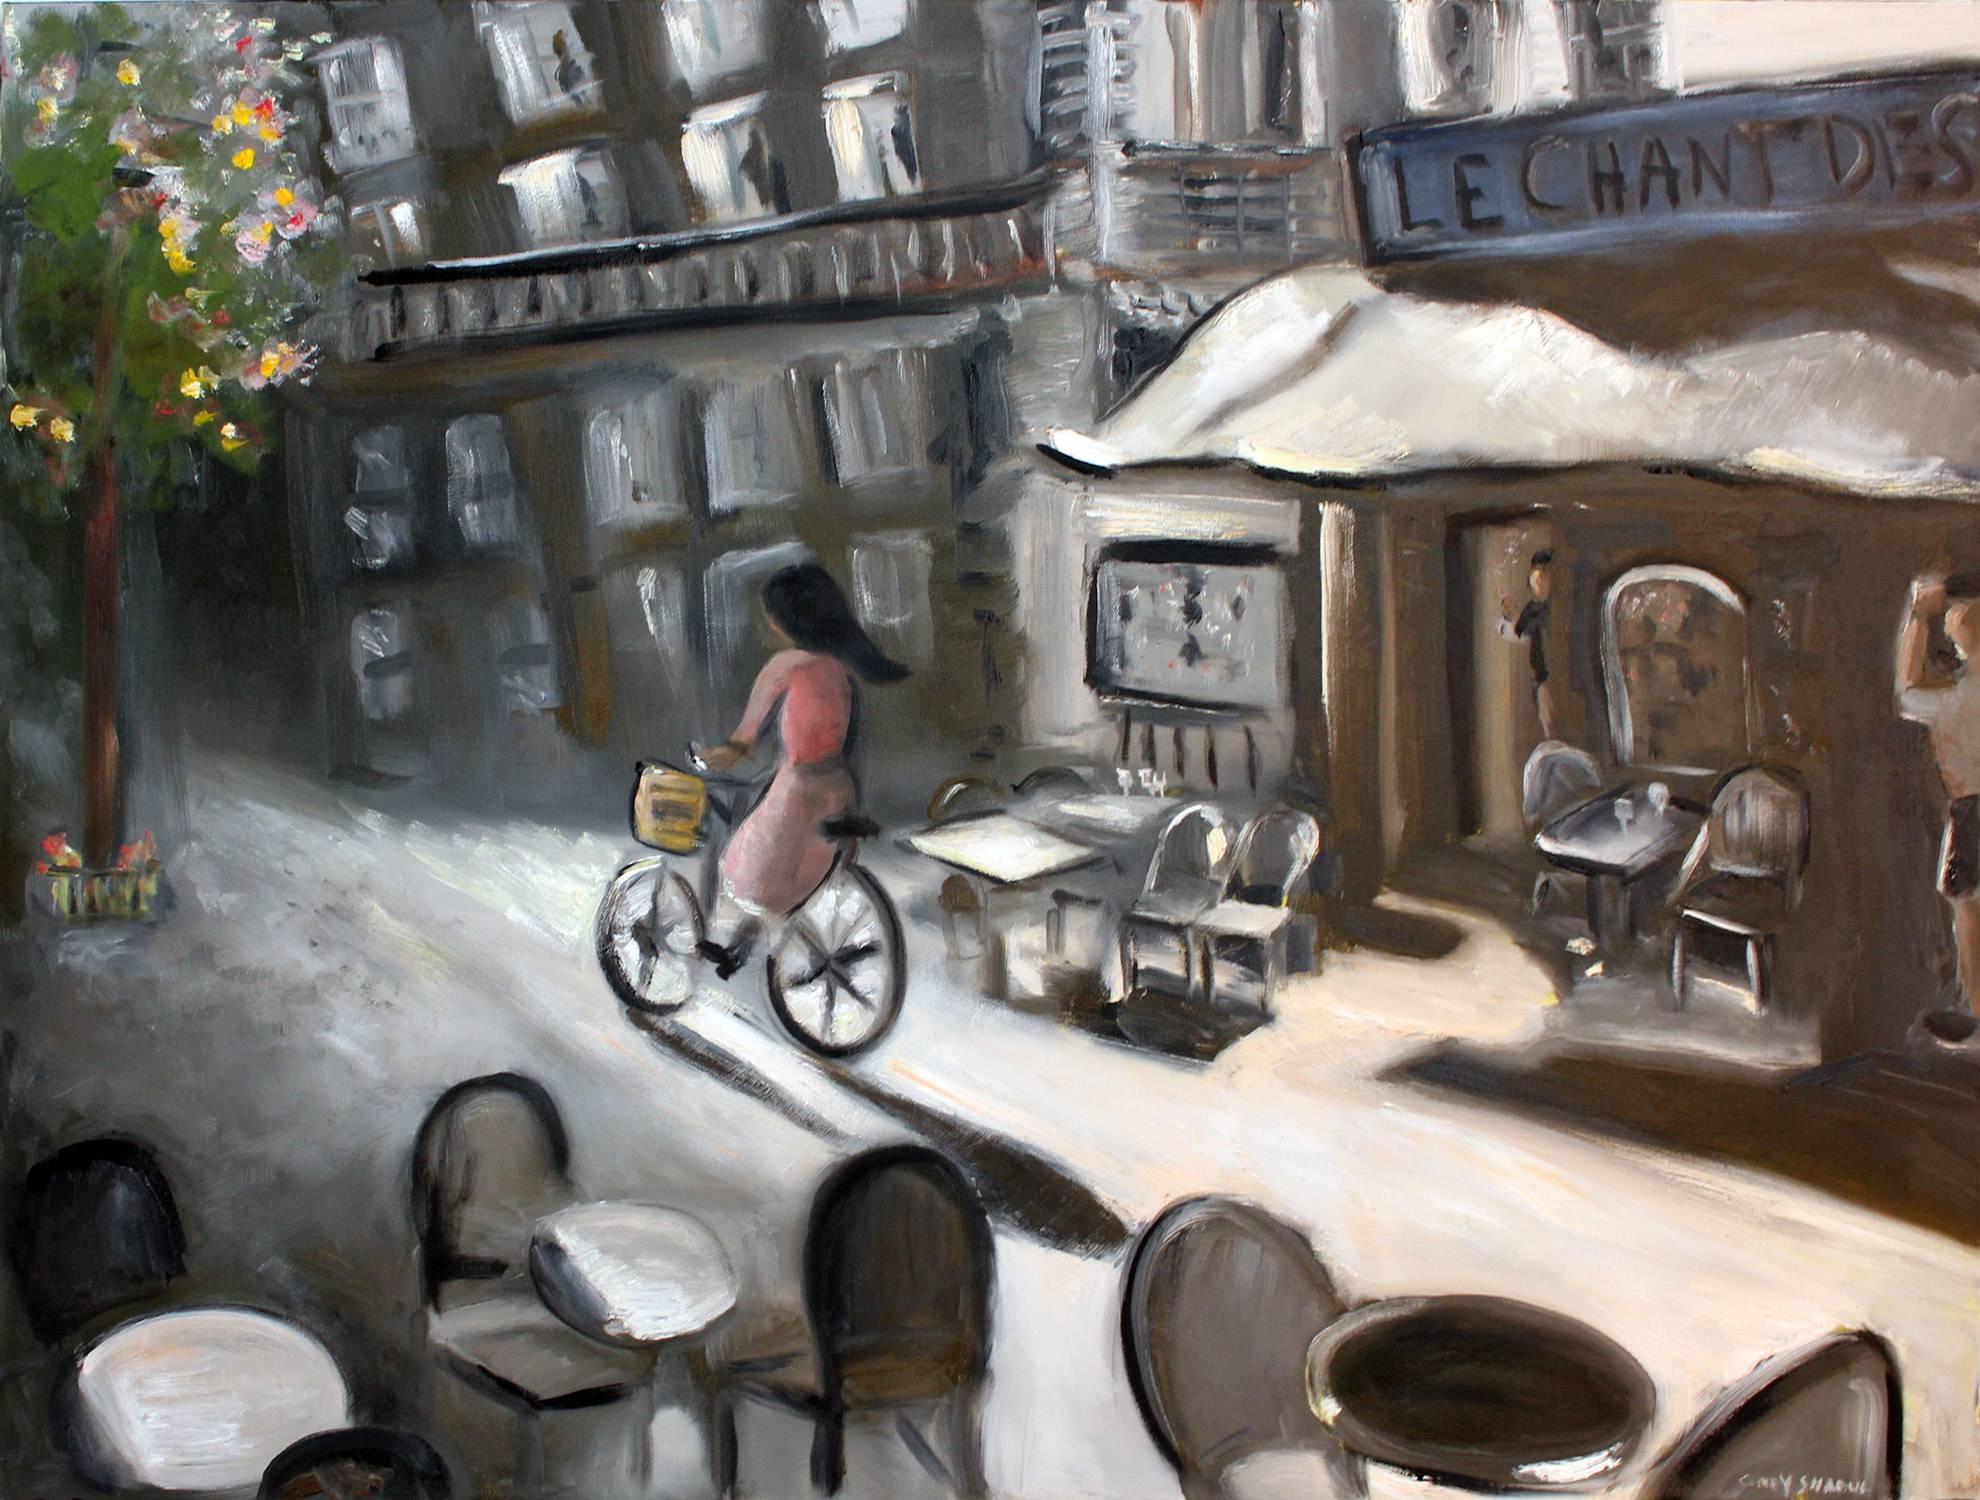 Cindy Shaoul Figurative Painting - "Biking through Paris, Le Chant Des" Impressionist Style Street Scene and Figure